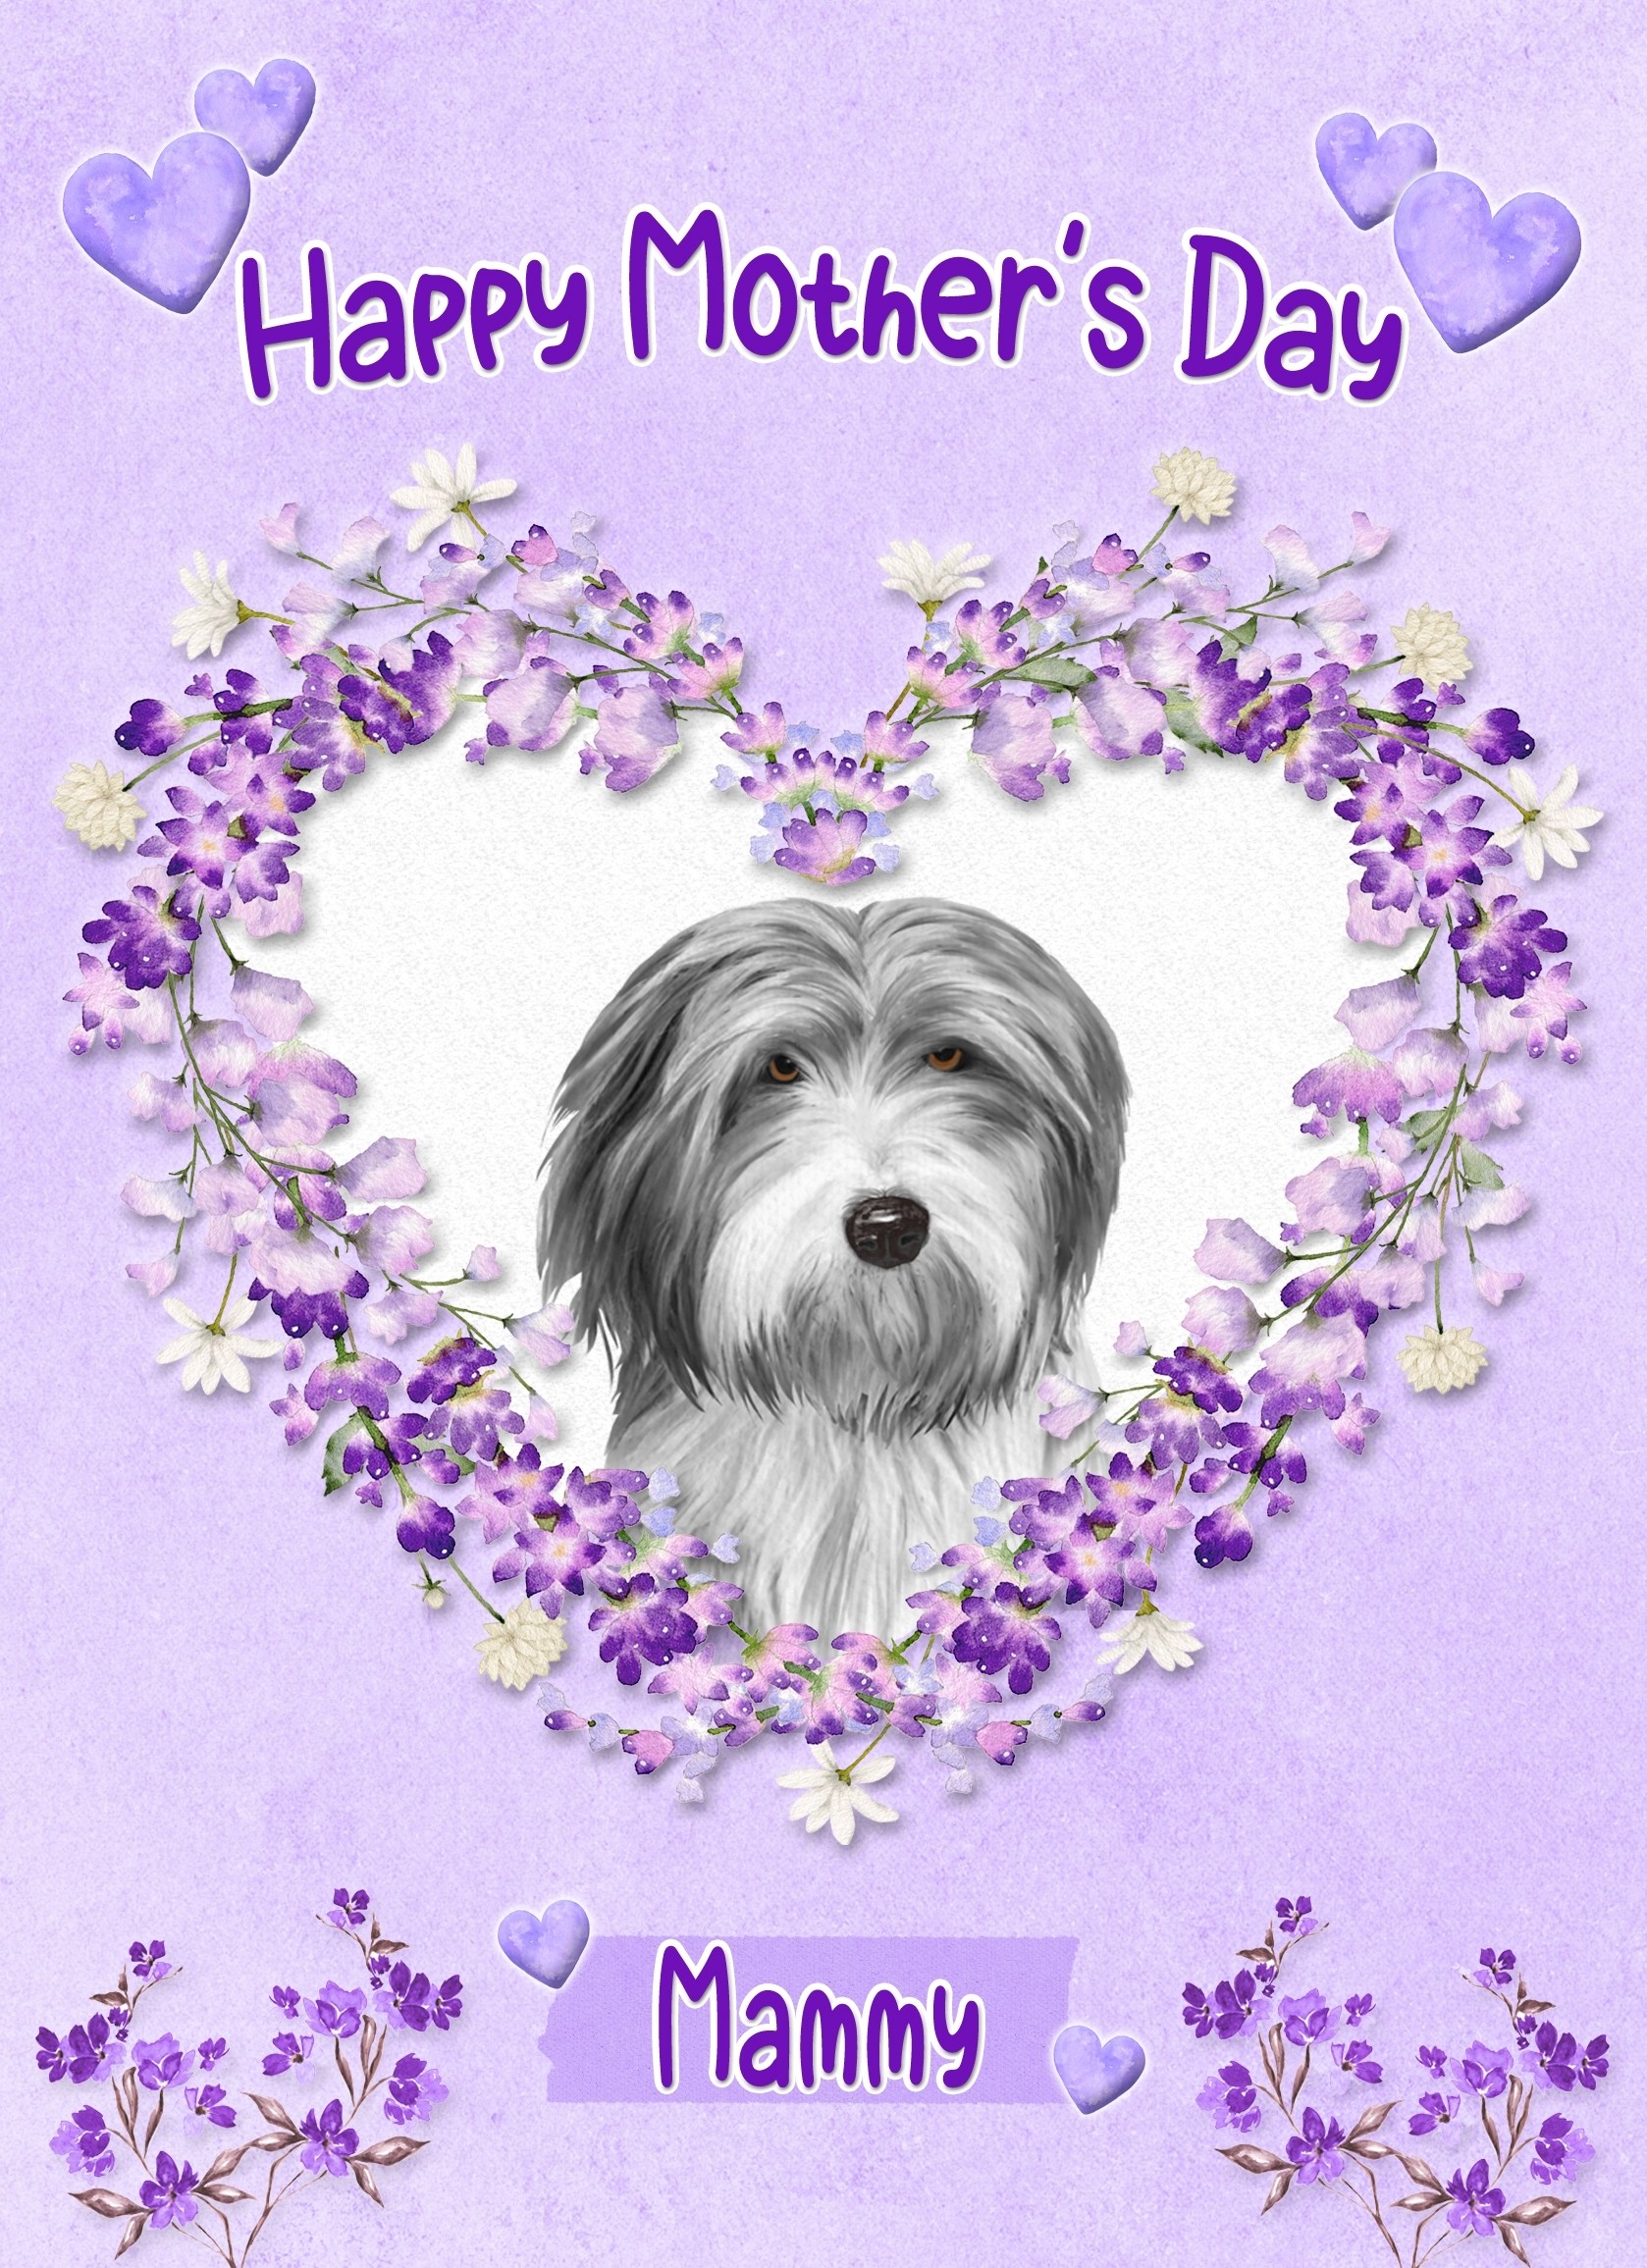 Bearded Collie Dog Mothers Day Card (Happy Mothers, Mammy)